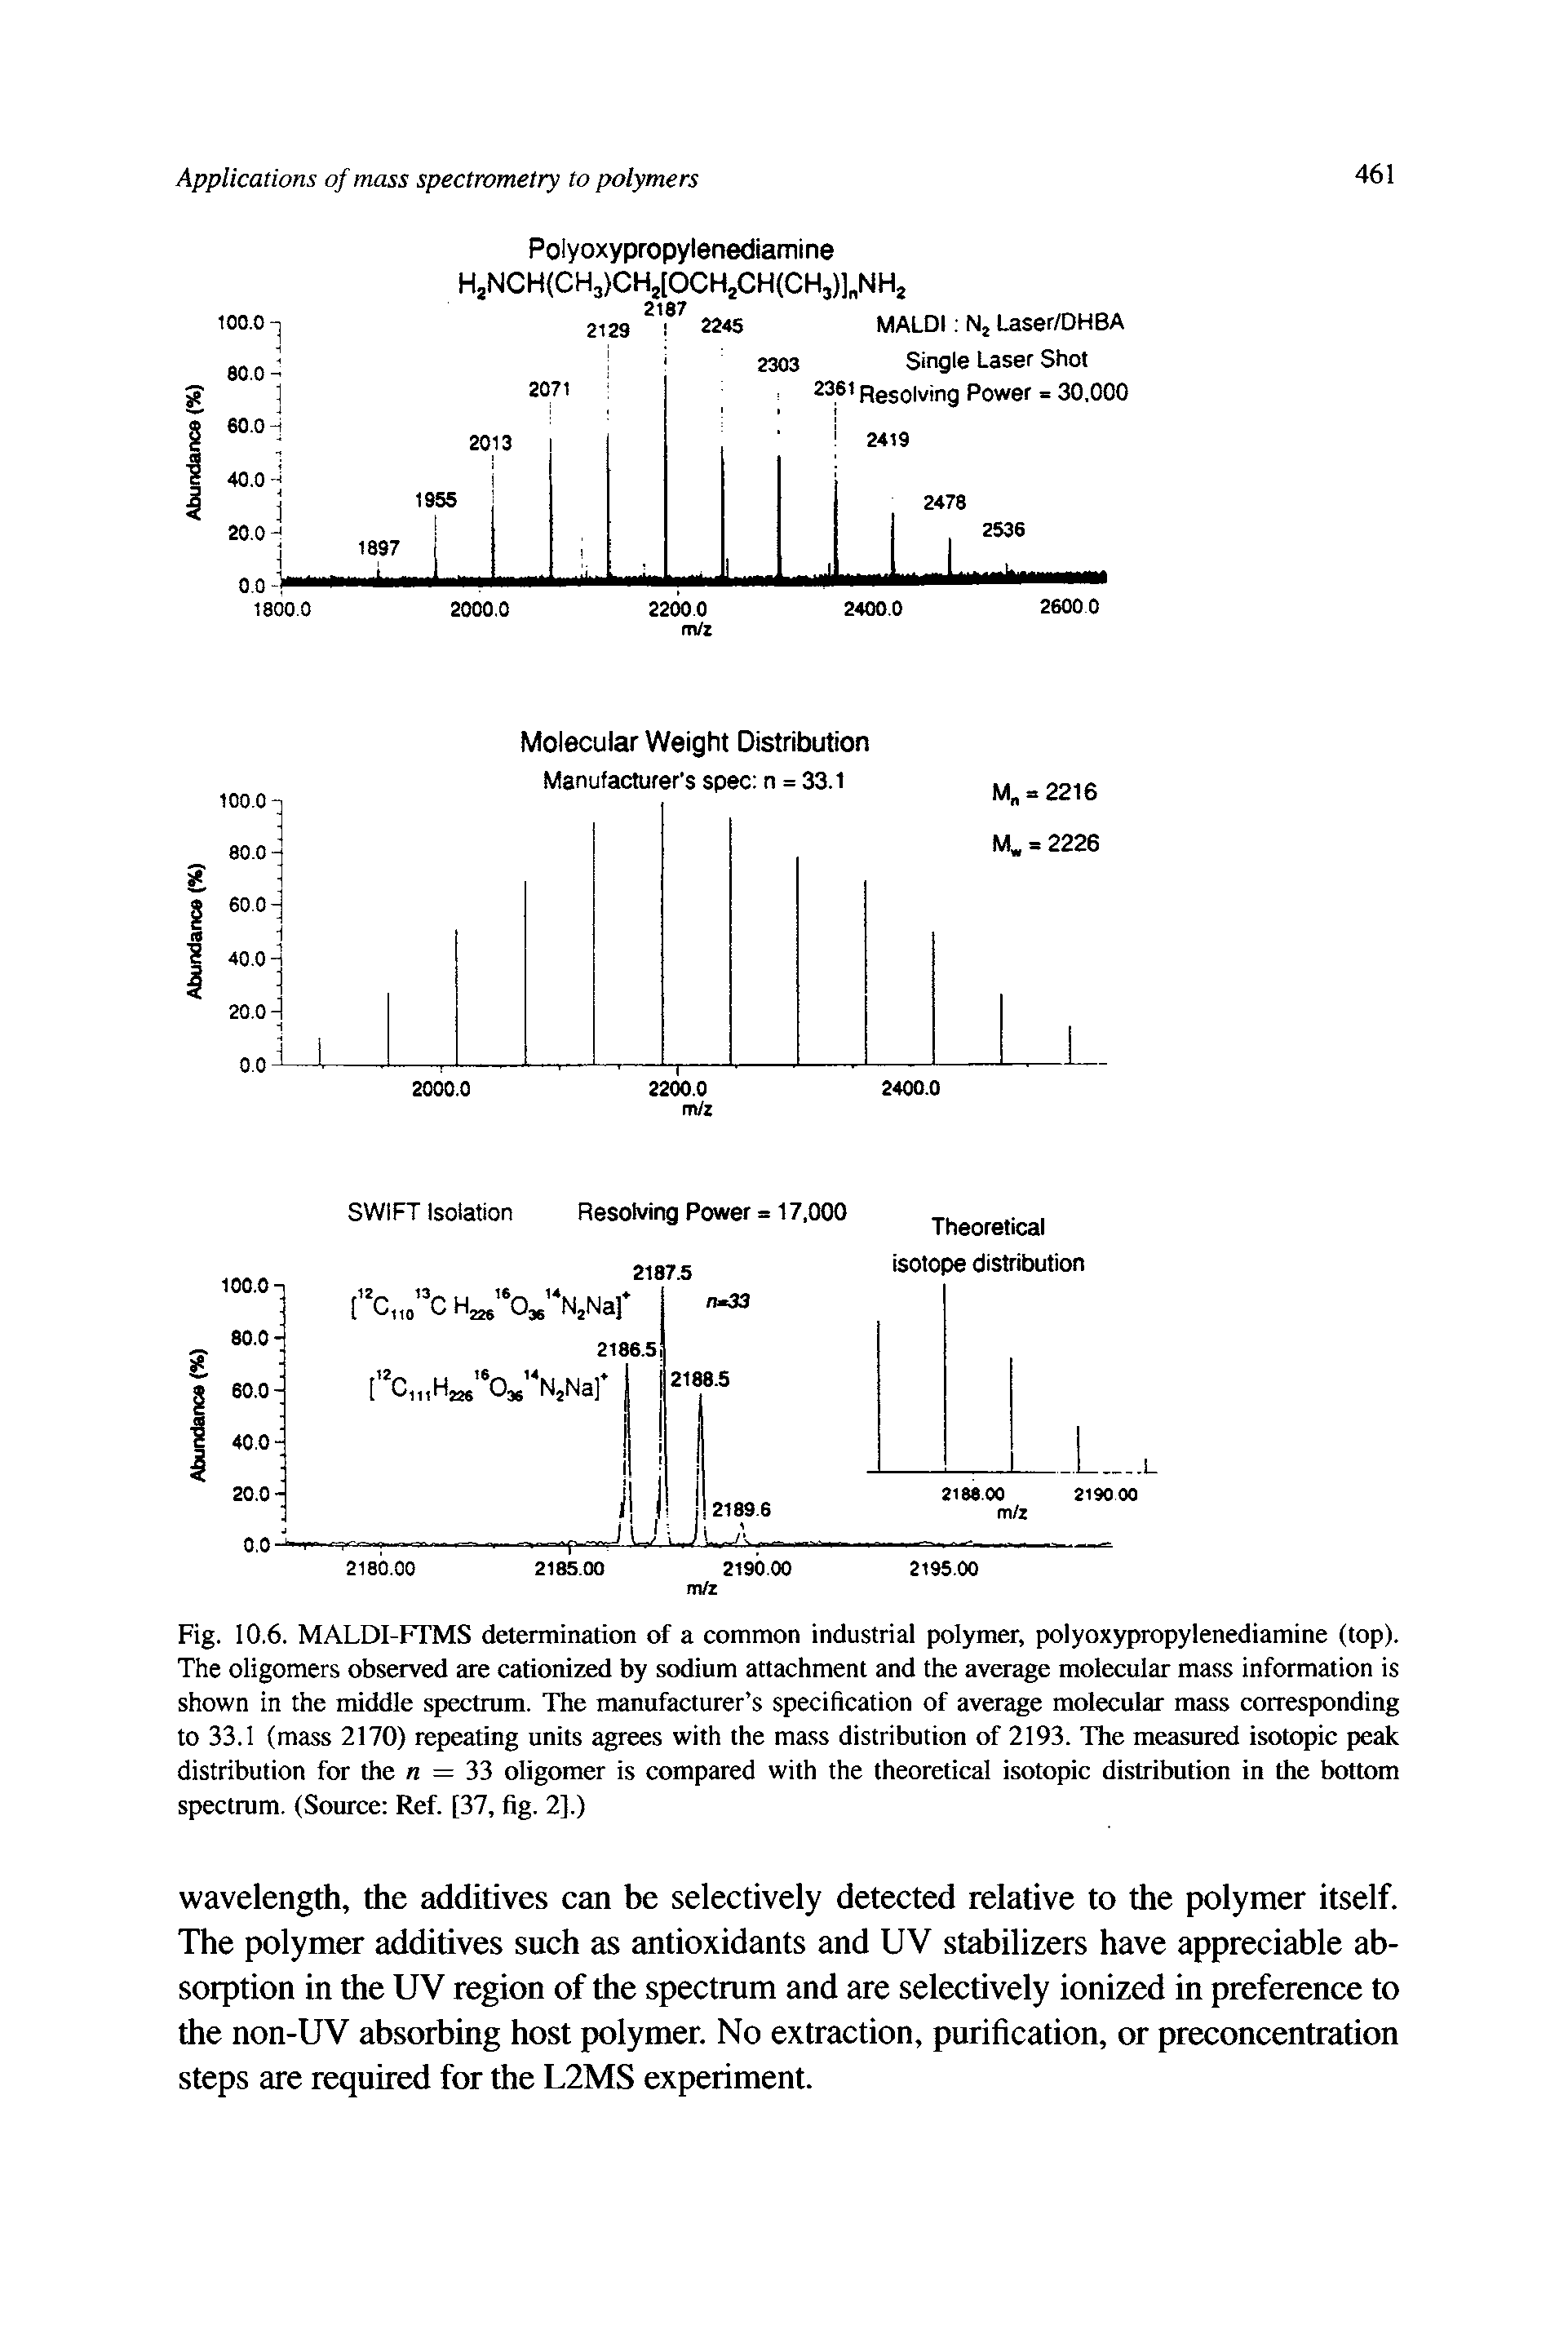 Fig. 10.6. MALDI-FTMS determination of a common industrial polymer, polyoxypropylenediamine (top). The oligomers observed are cationized by sodium attachment and the average molecular mass information is shown in the middle spectrum. The manufacturer s specification of average molecular mass corresponding to 33.1 (mass 2170) repeating units agrees with the ma.ss distribution of 2193. TTie measured isotopic peak distribution for the n = 33 oligomer is compared with the theoretical isotopic distribution in the bottom spectrum. (Source Ref. [37, fig. 2].)...